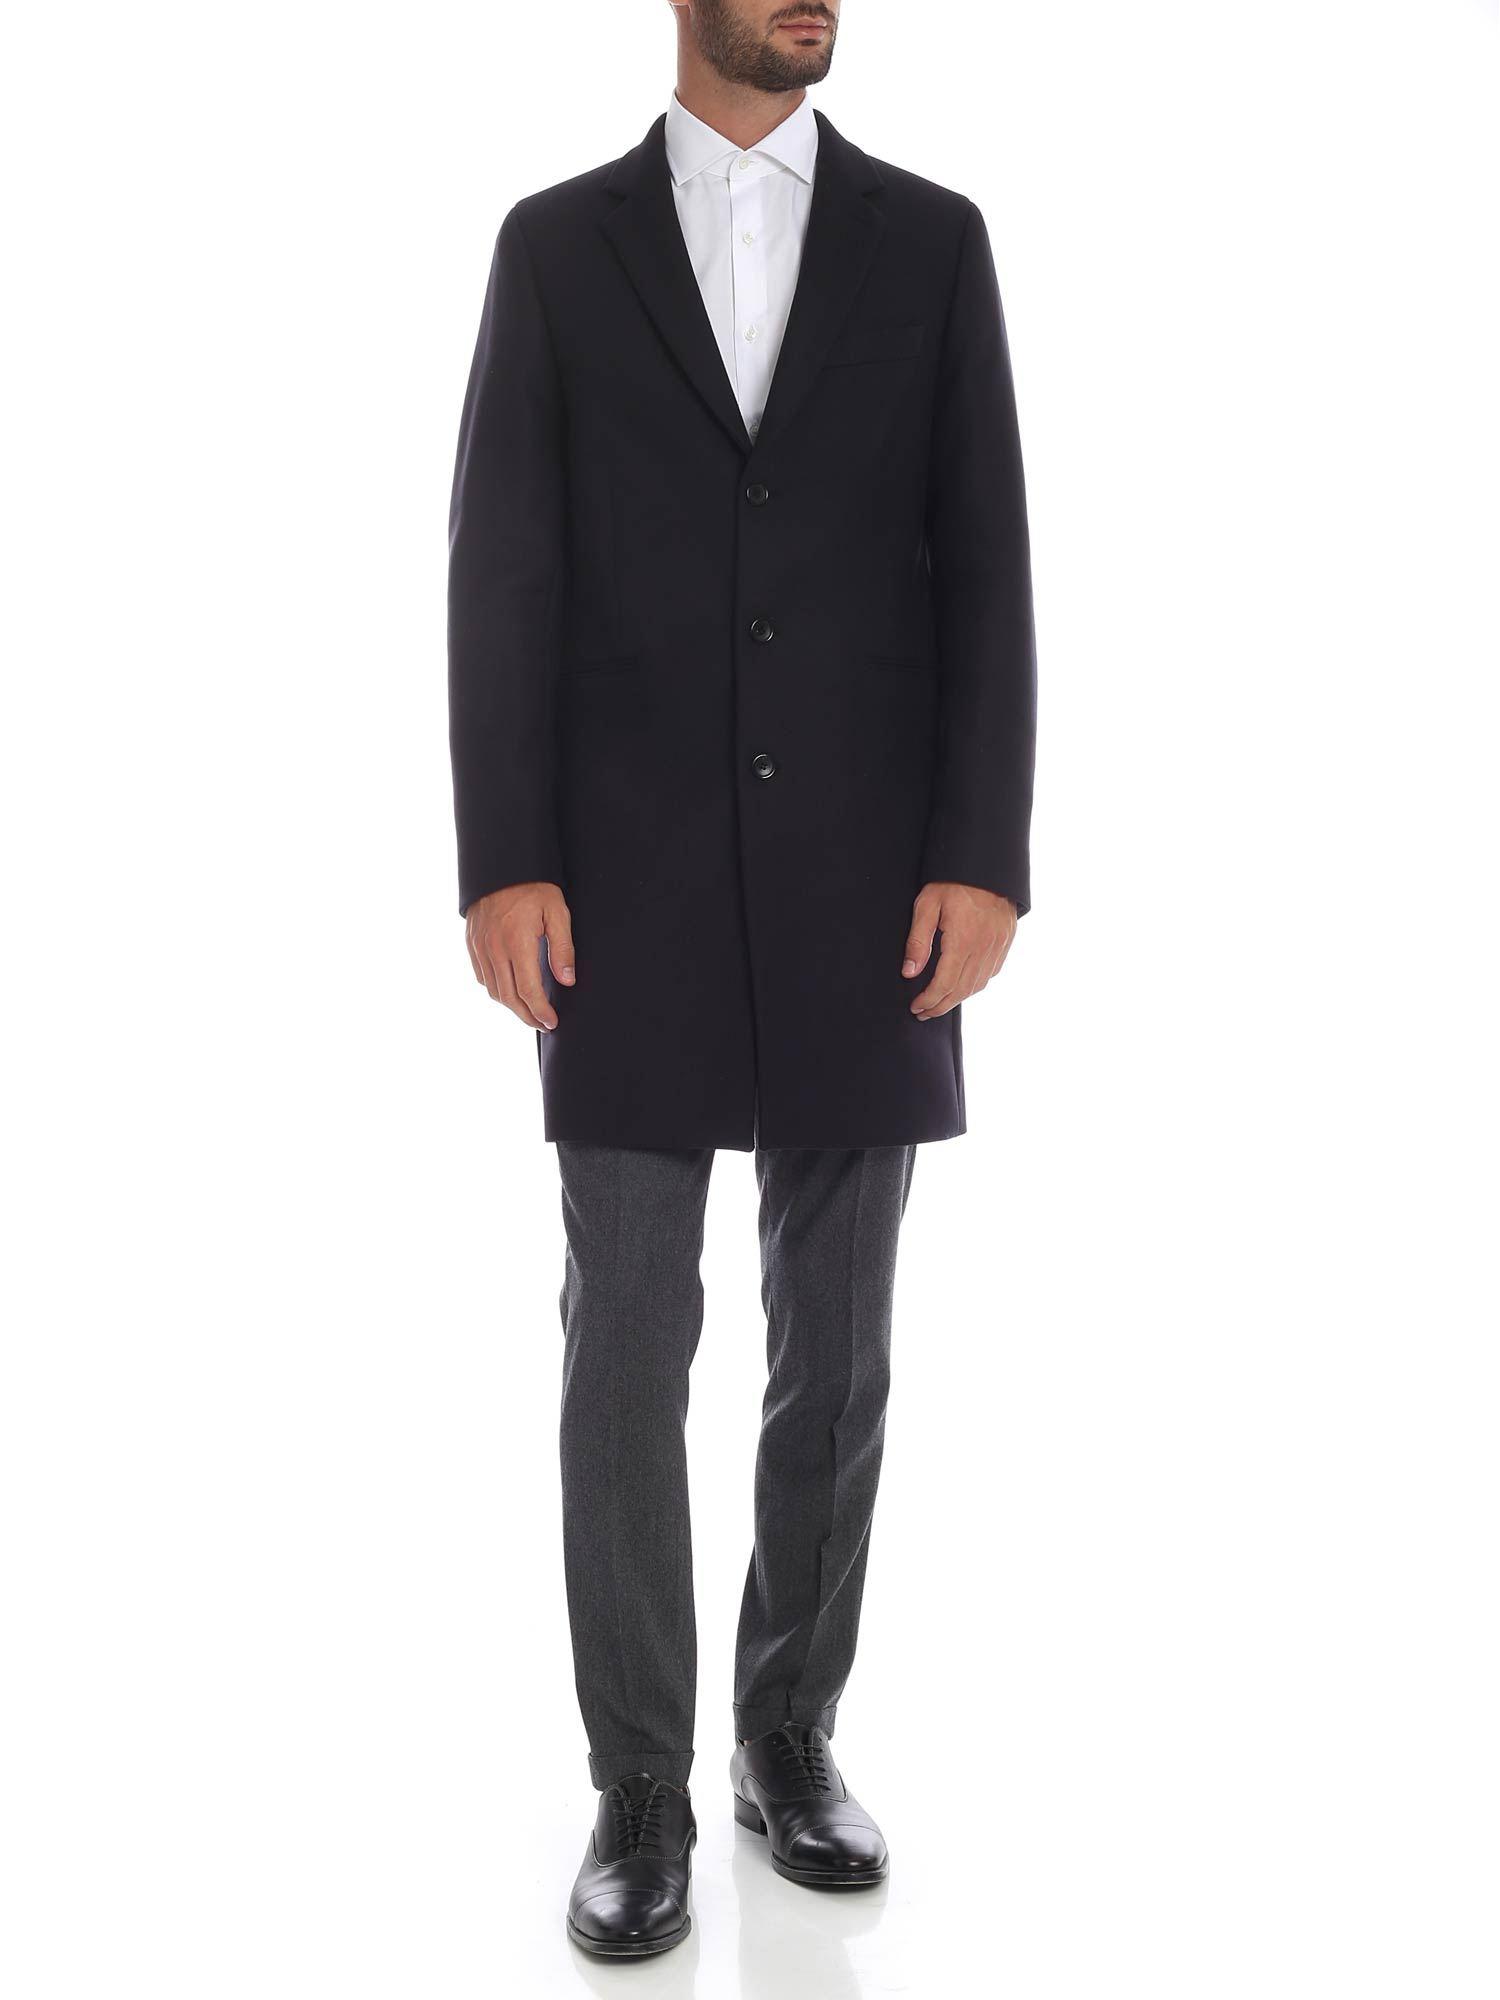 PS by Paul Smith Wool And Cashmere Coat In Black for Men - Lyst